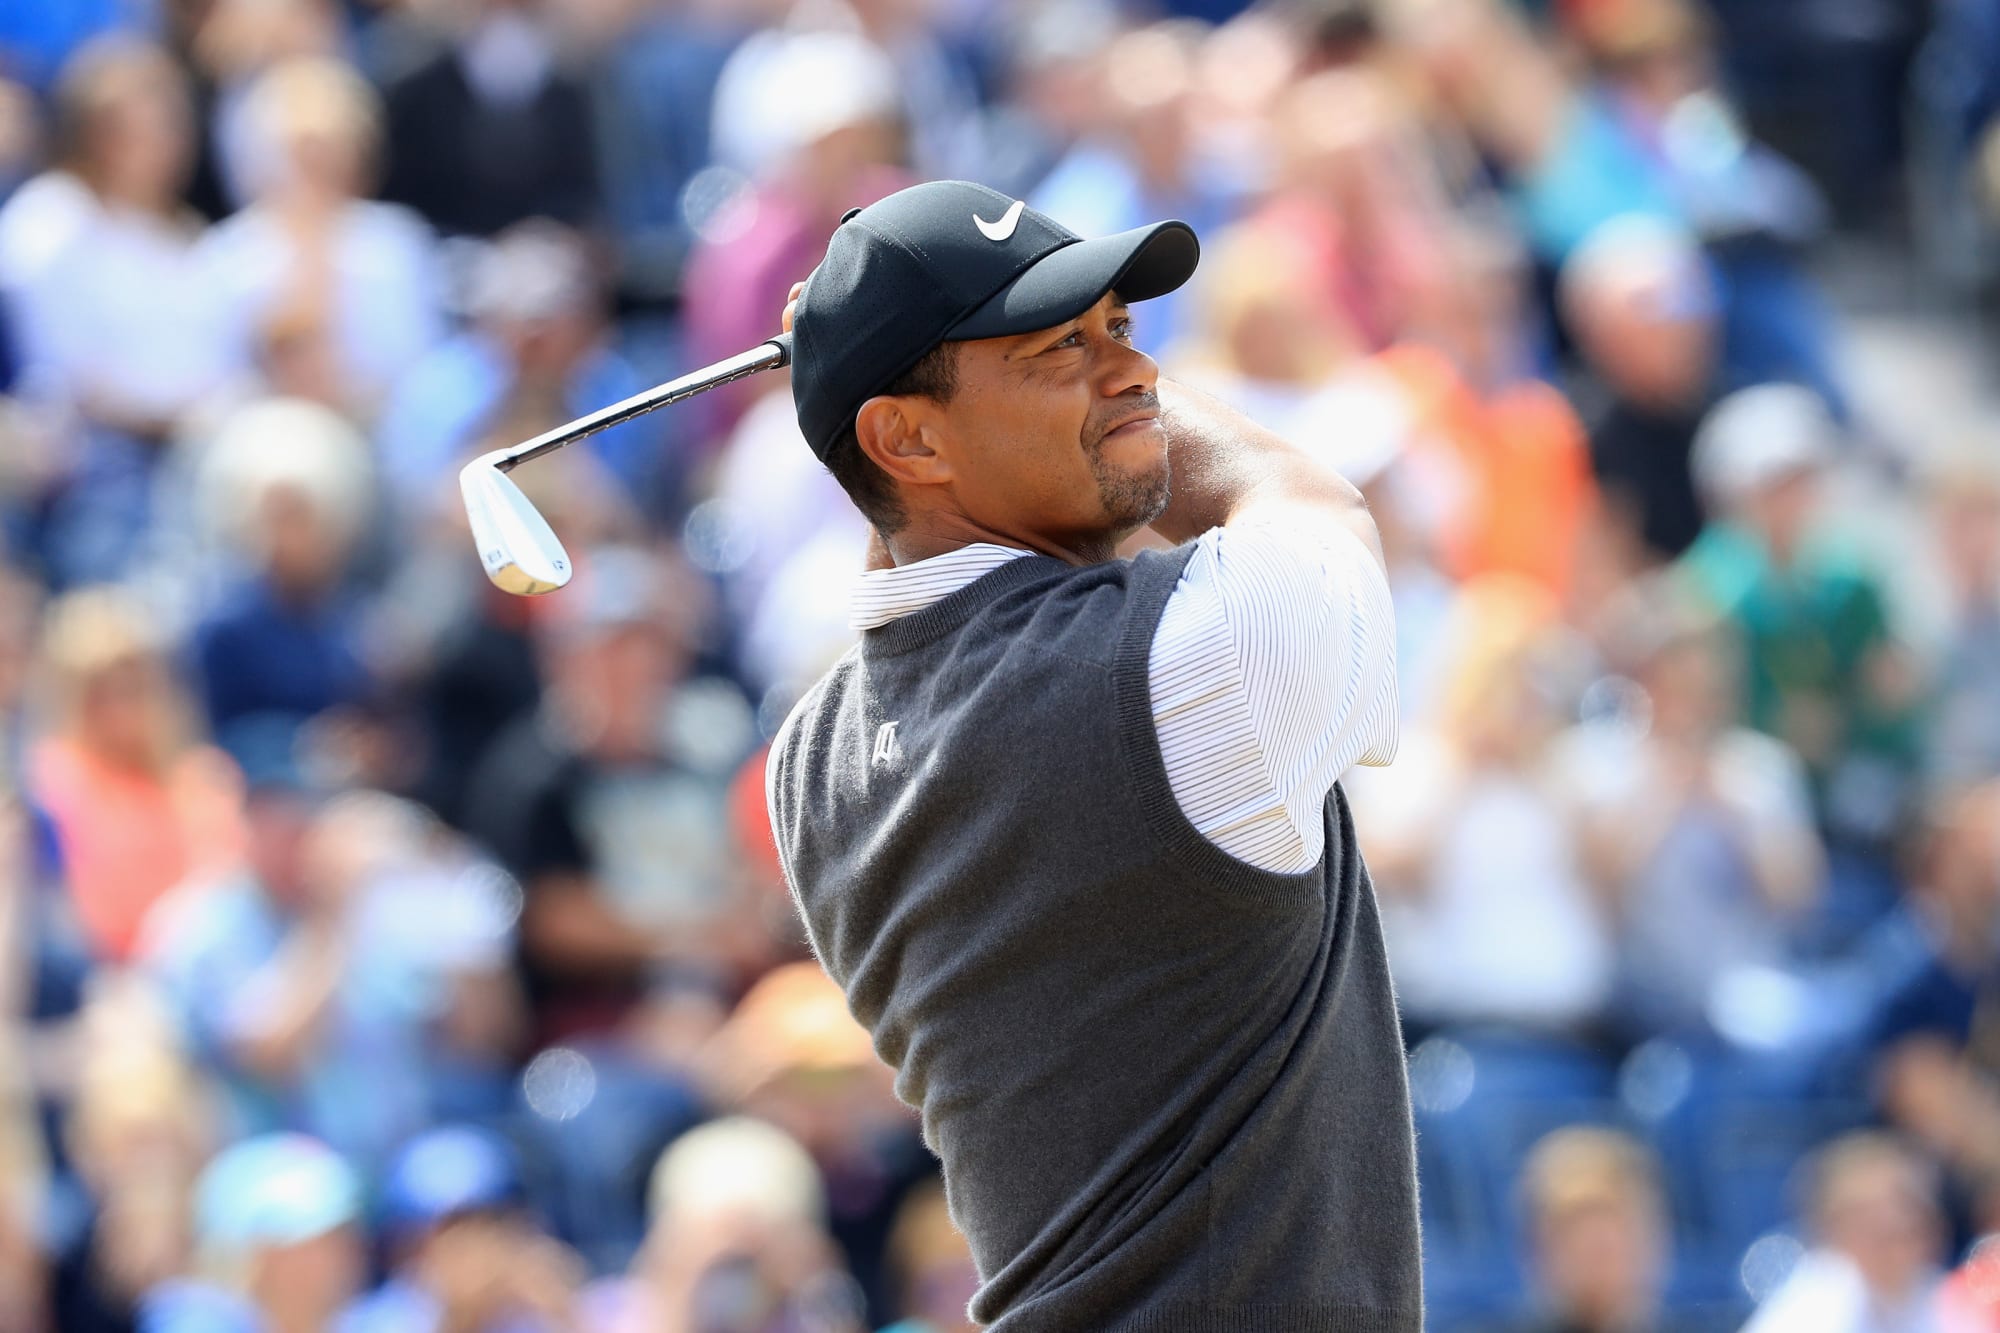 Tiger Woods British Open win would be his greatest ever